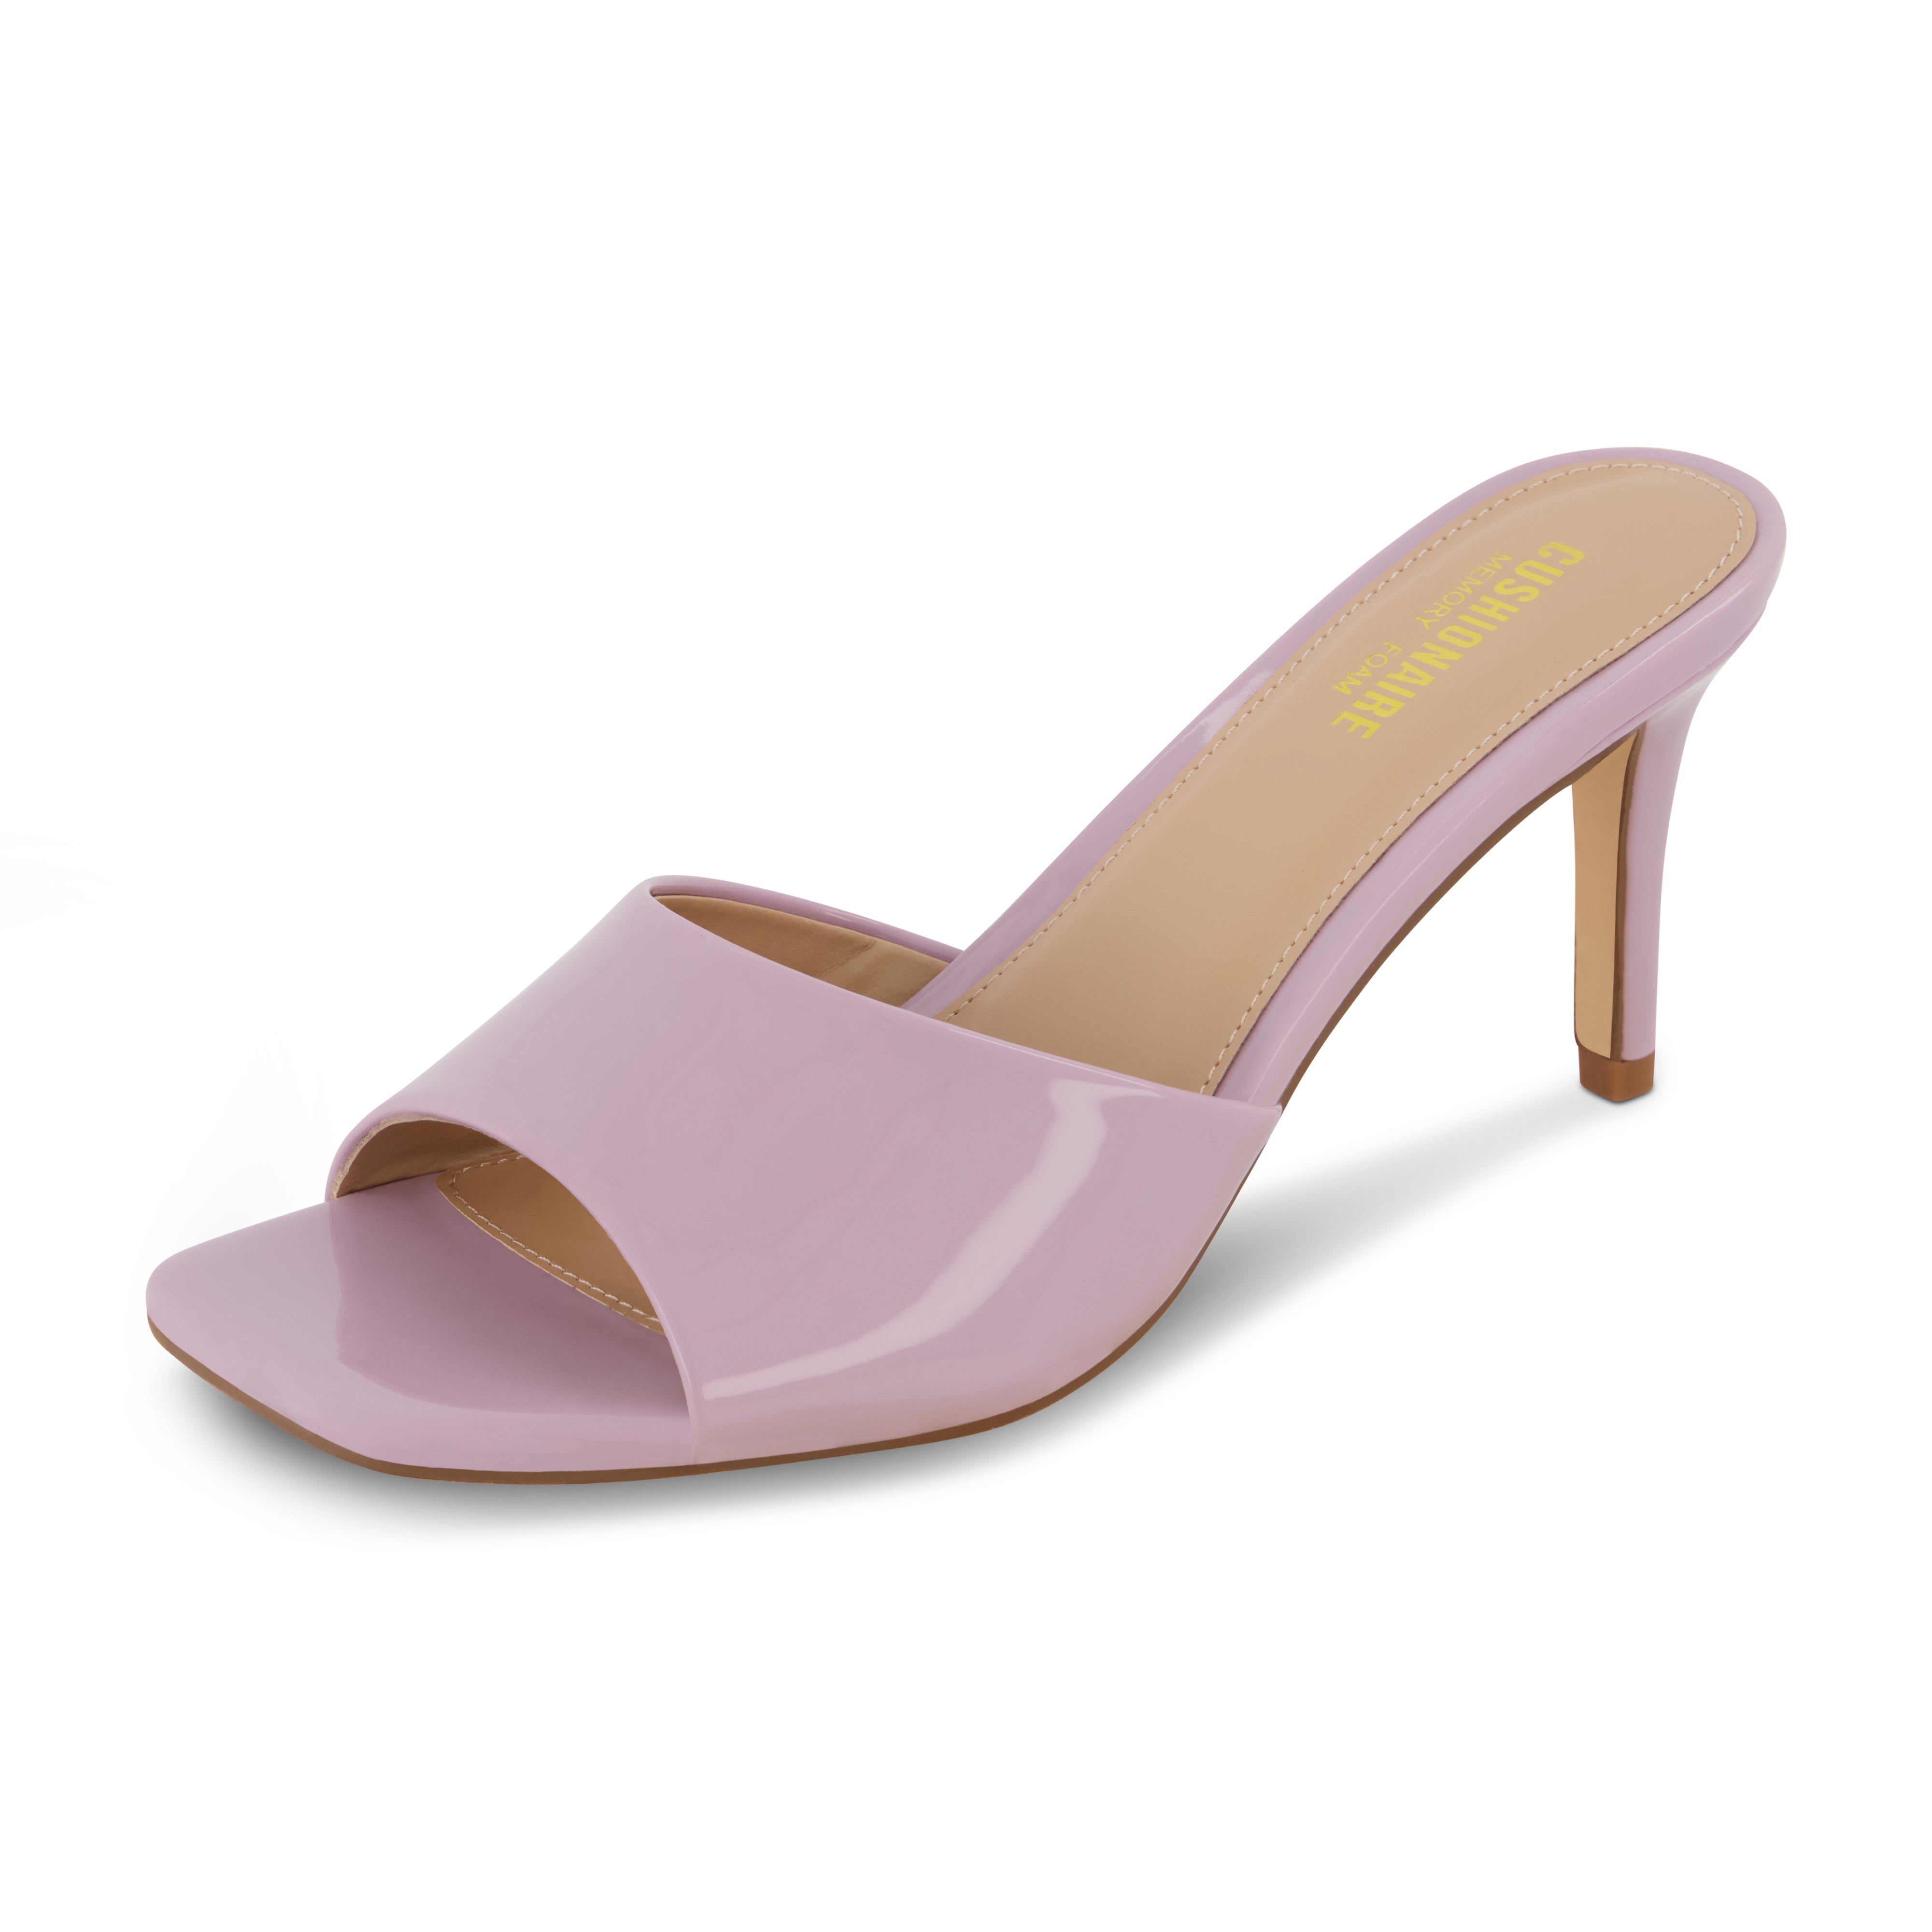 Evie One Band Dress Heel Patents